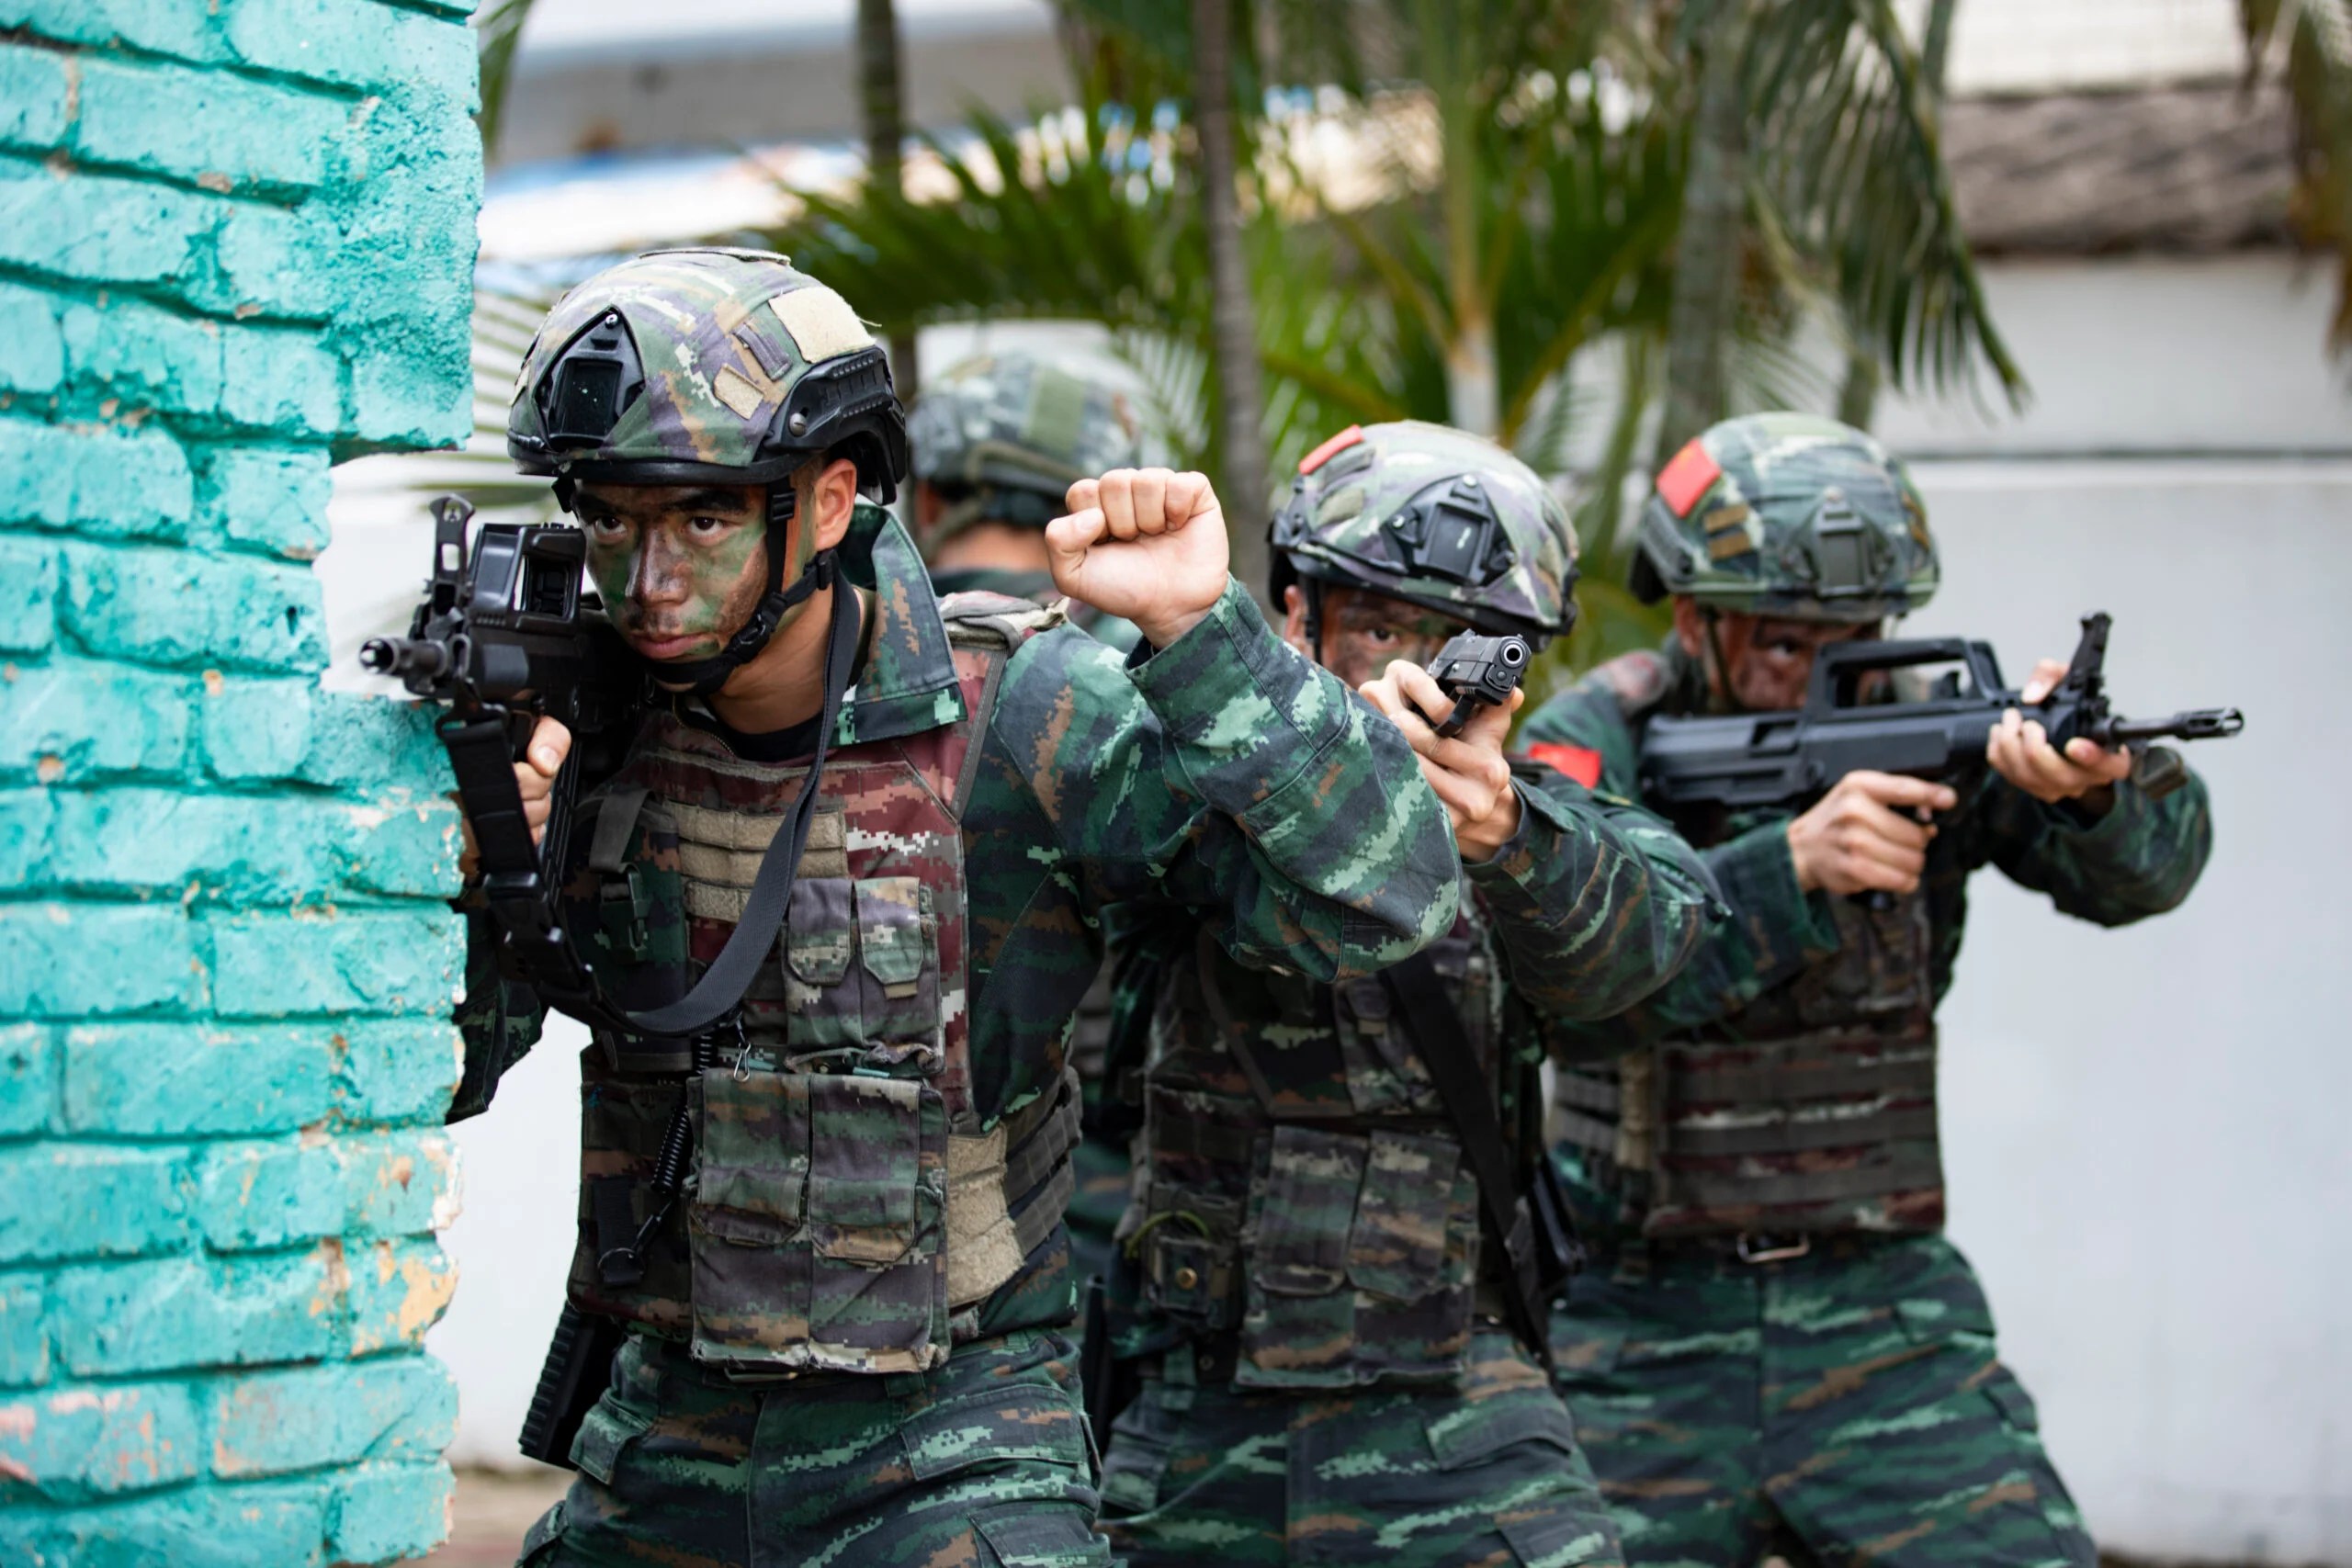 Chinese troops practicing house-breaching and room-clearing tactics